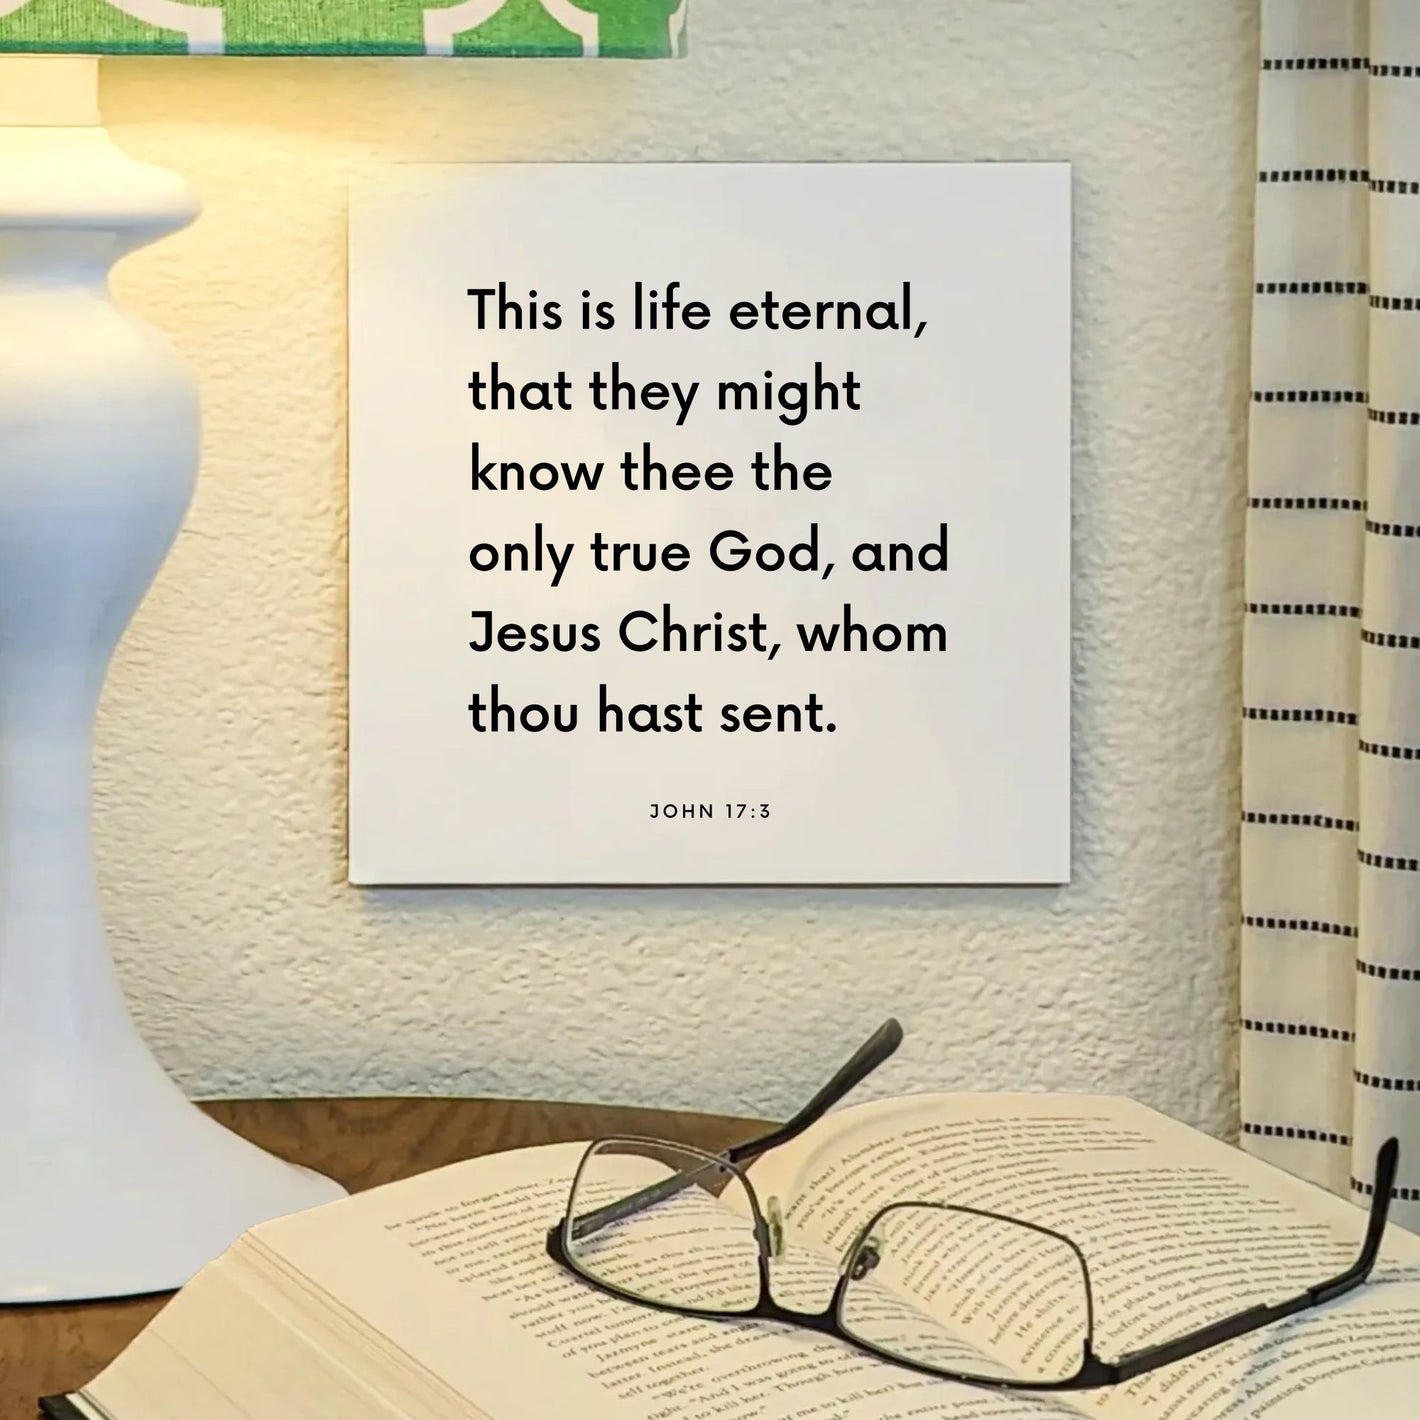 Lamp mouting of the scripture tile for John 17:3 - "This is life eternal, that they might know thee"